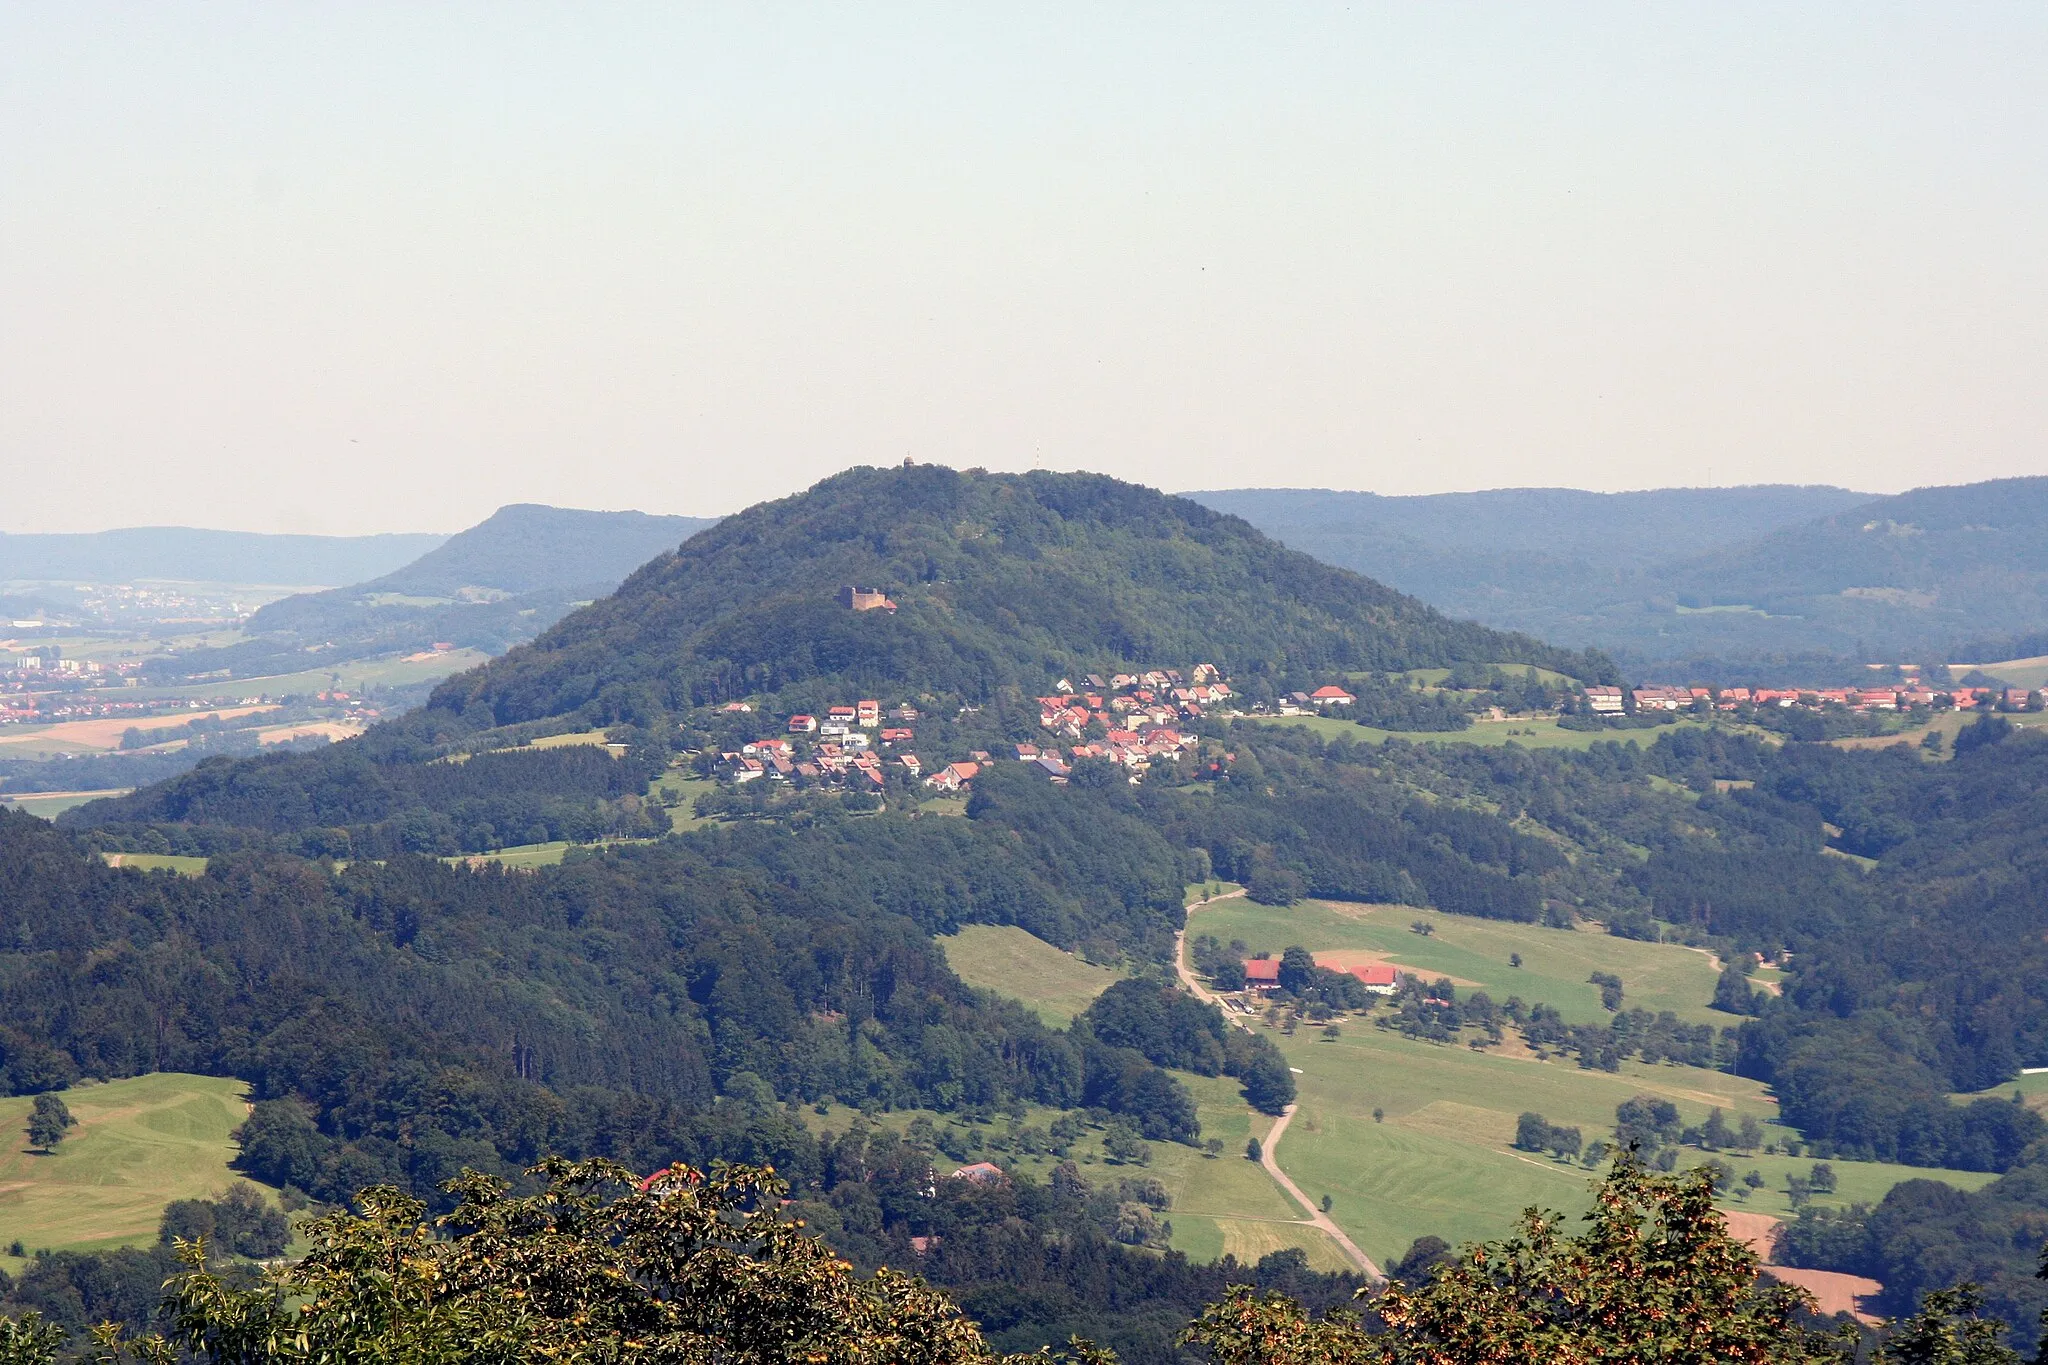 Photo showing: The Rechberg mountain as seen from the Hohenstaufen mountain